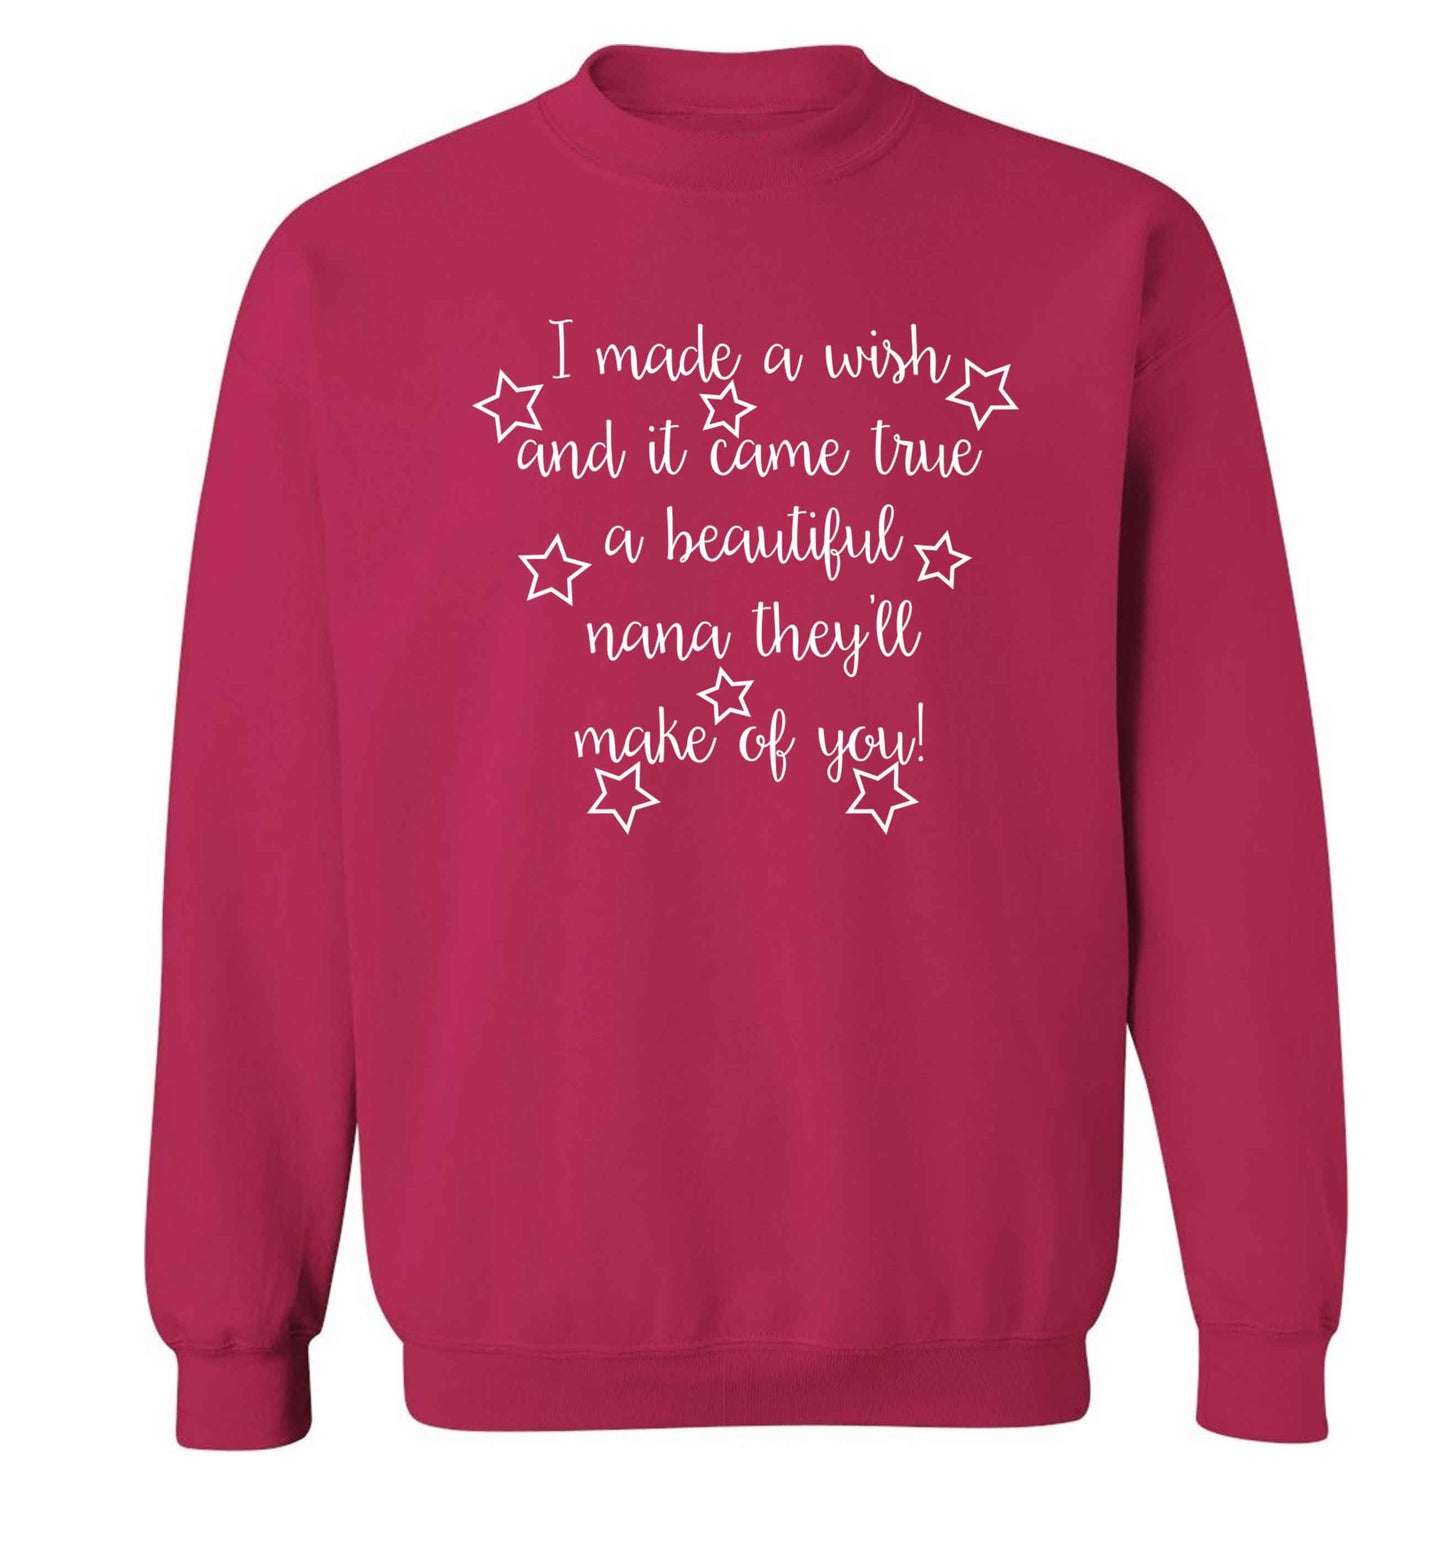 I made a wish and it came true a beautiful nana they'll make of you! Adult's unisex pink Sweater 2XL